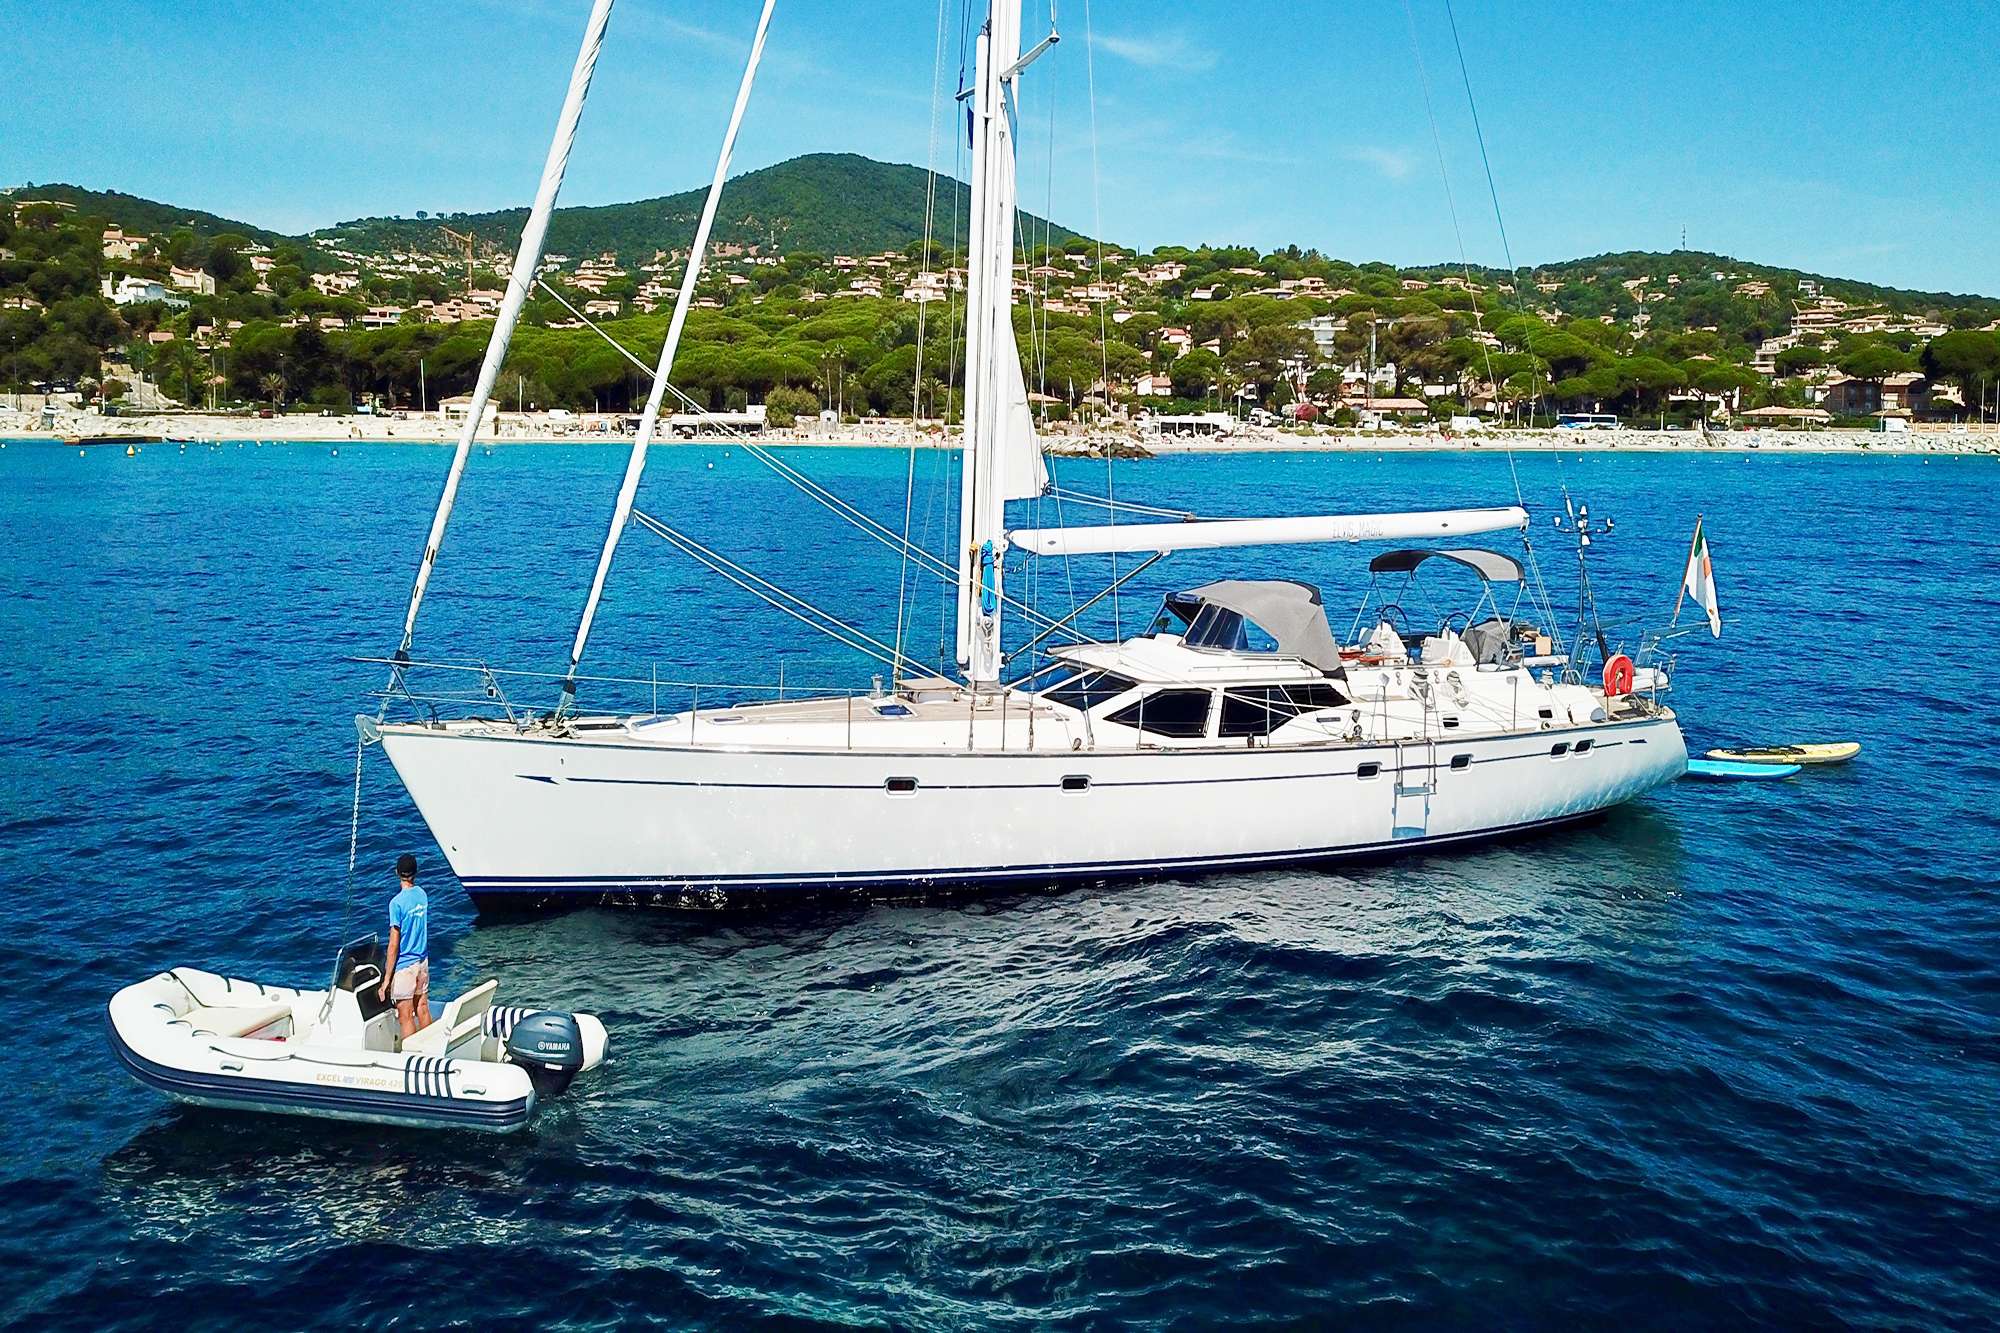 ELVIS MAGIC Yacht Charter - Resting in Calm Waters